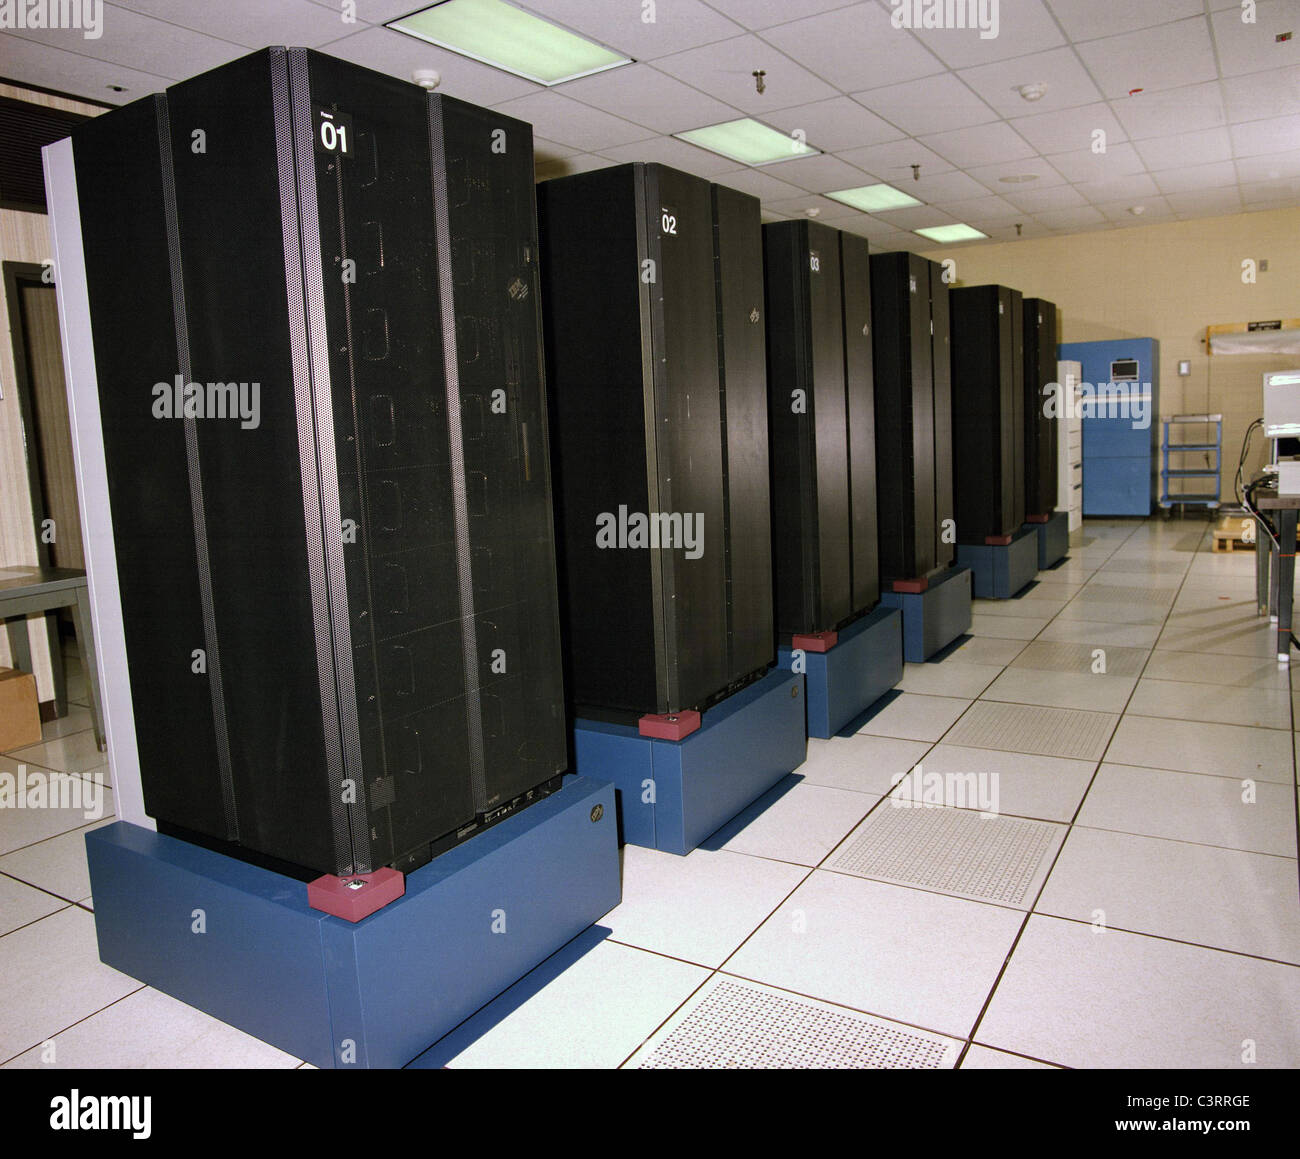 Langley Research Center's IBM SP-2 HPCCP testbed computer called Poseidon Stock Photo